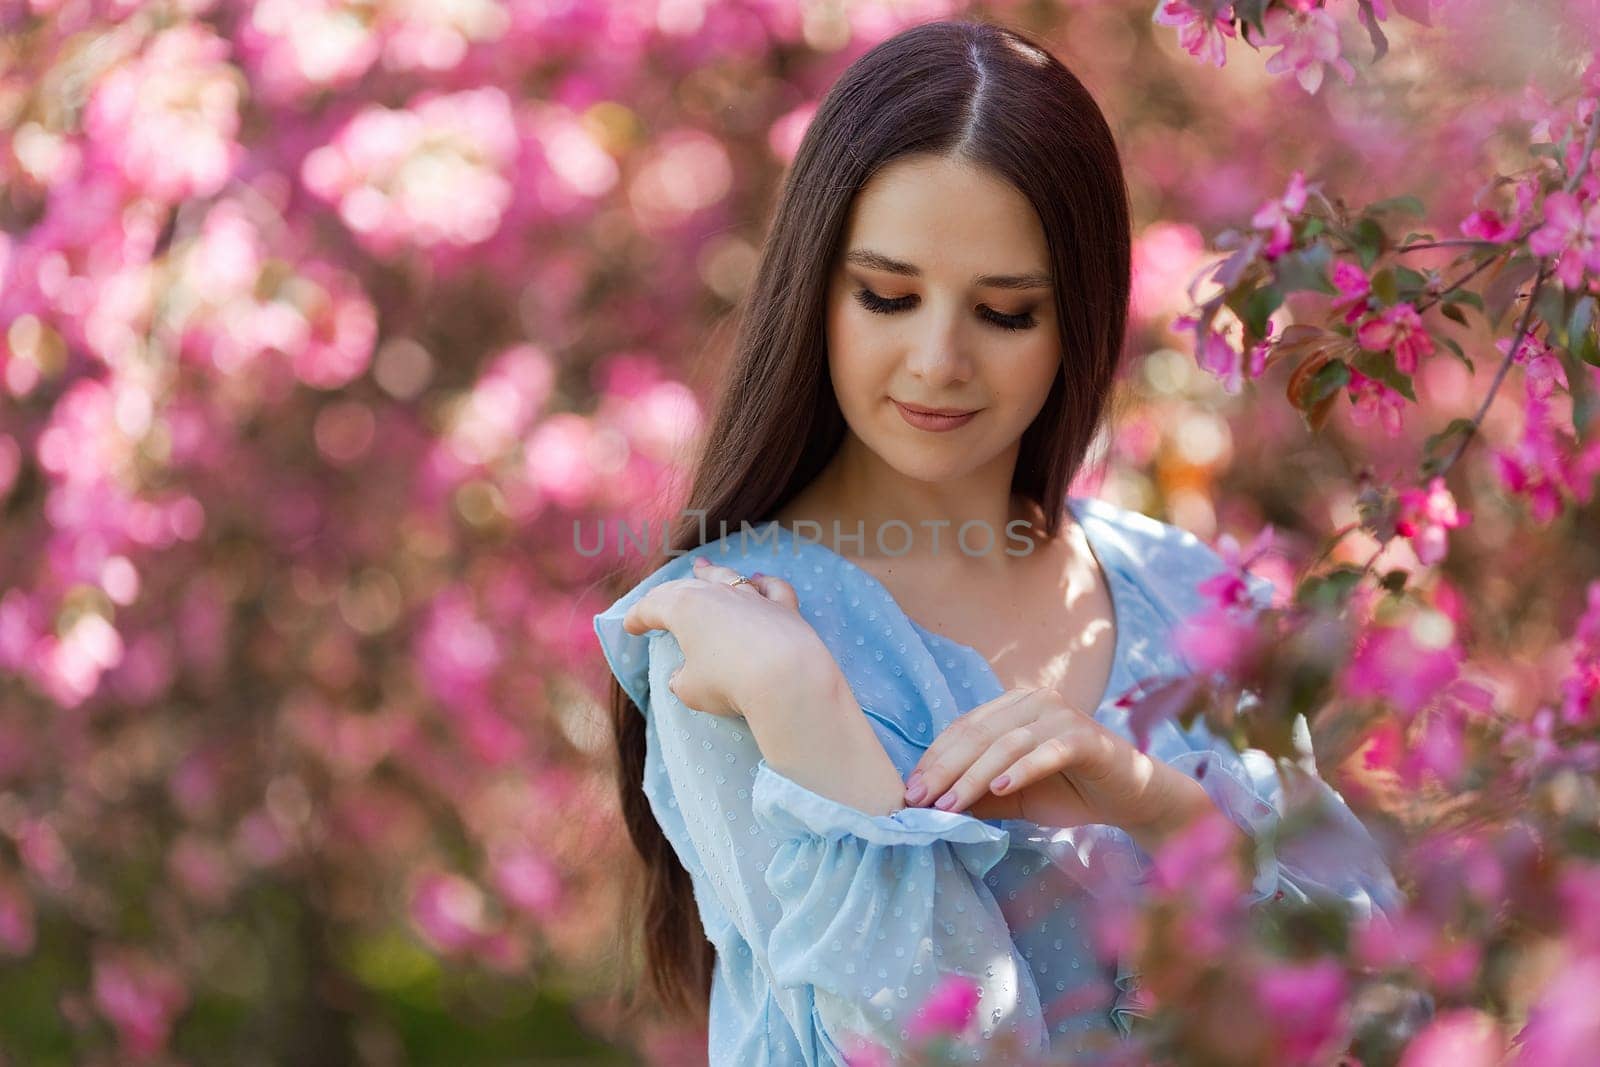 Pretty girl with long hair is standing near a pink blooming apple tree, in the summer in the park. Close up